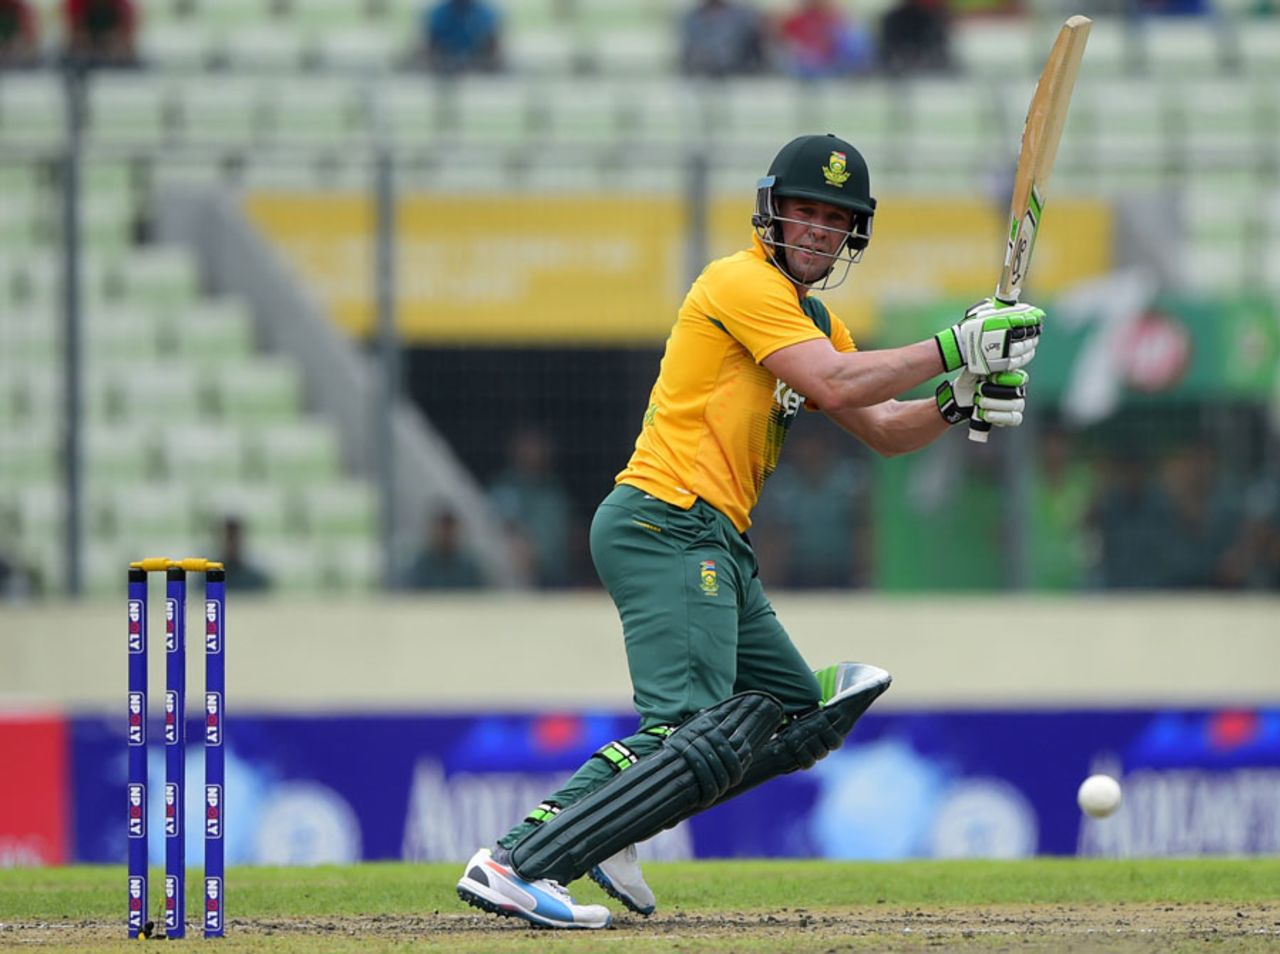 AB de Villiers guides one down to third man, Bangladesh v South Africa, 2nd T20I, Mirpur, July 7, 2015